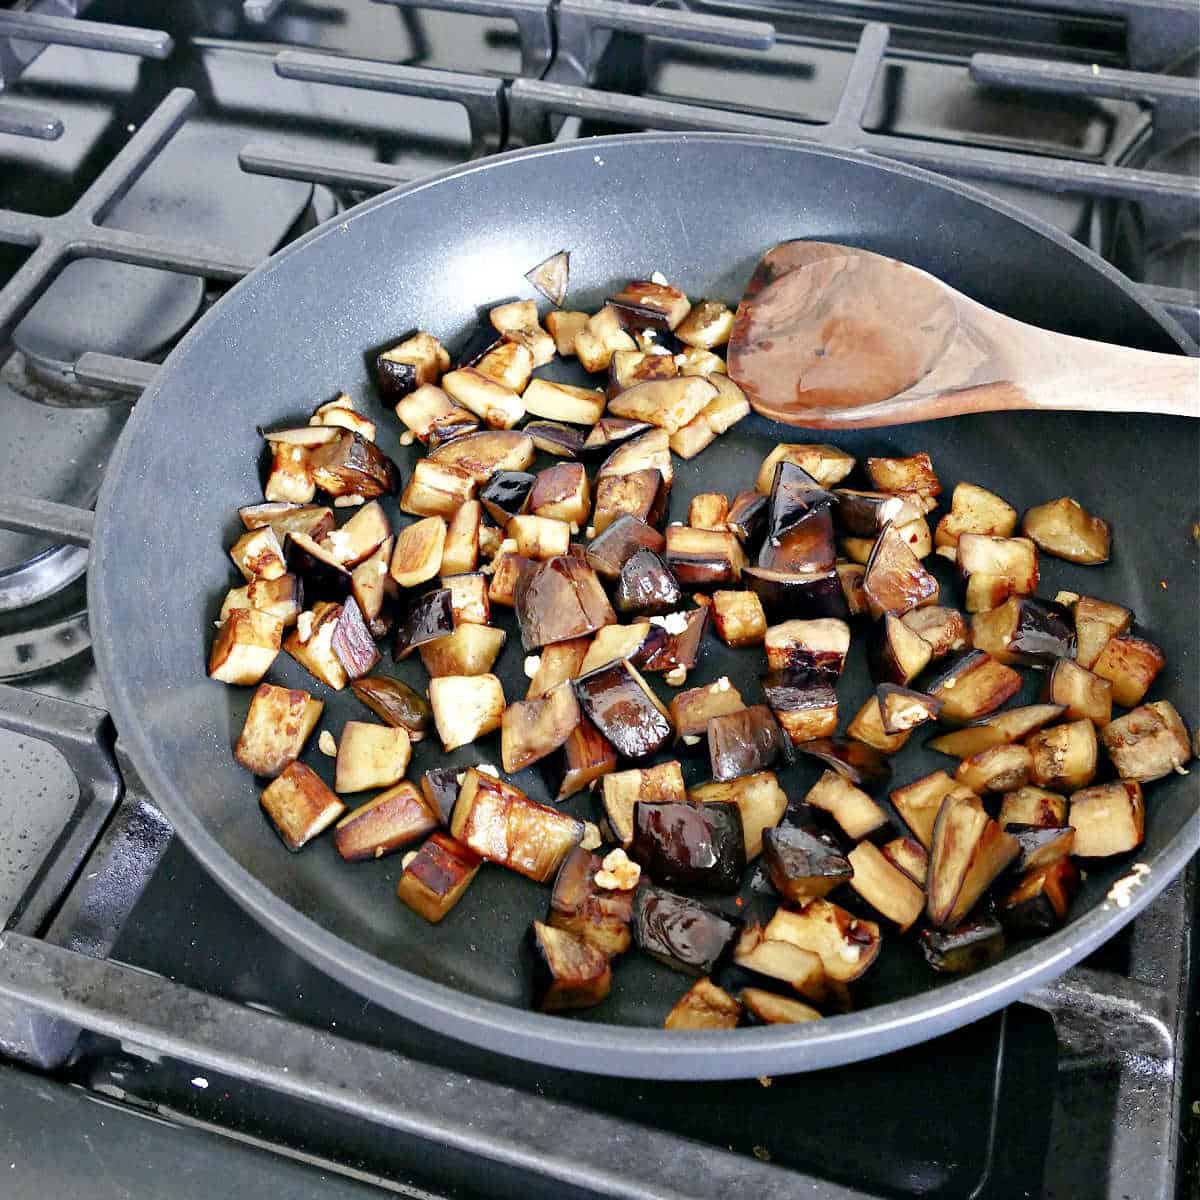 cubed eggplant cooked in olive oil and garlic in a skillet